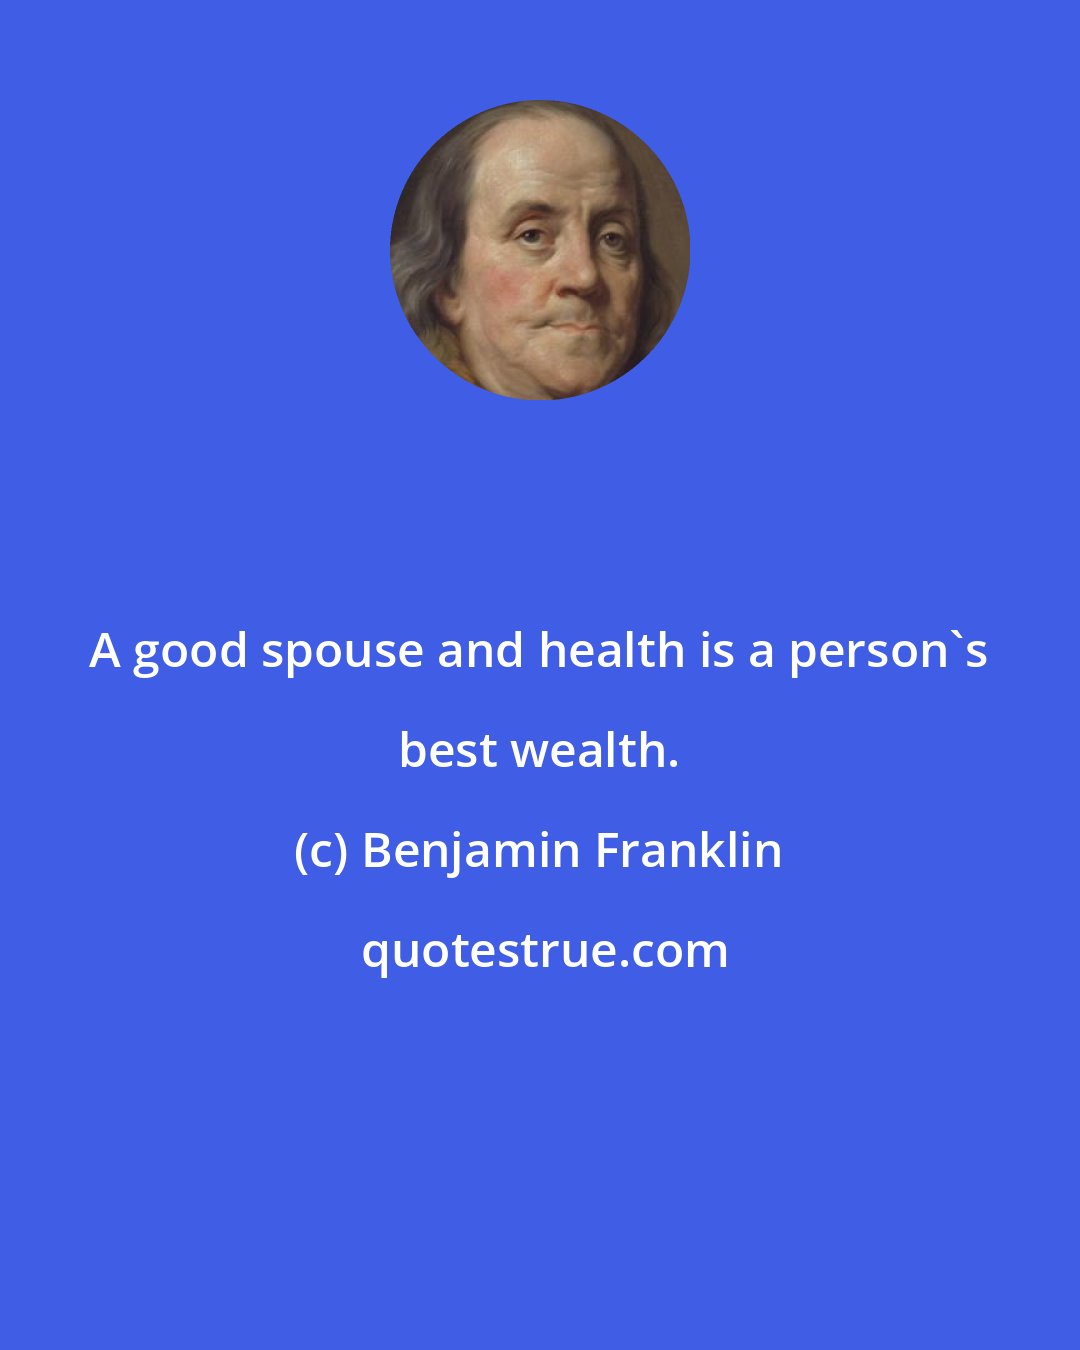 Benjamin Franklin: A good spouse and health is a person's best wealth.